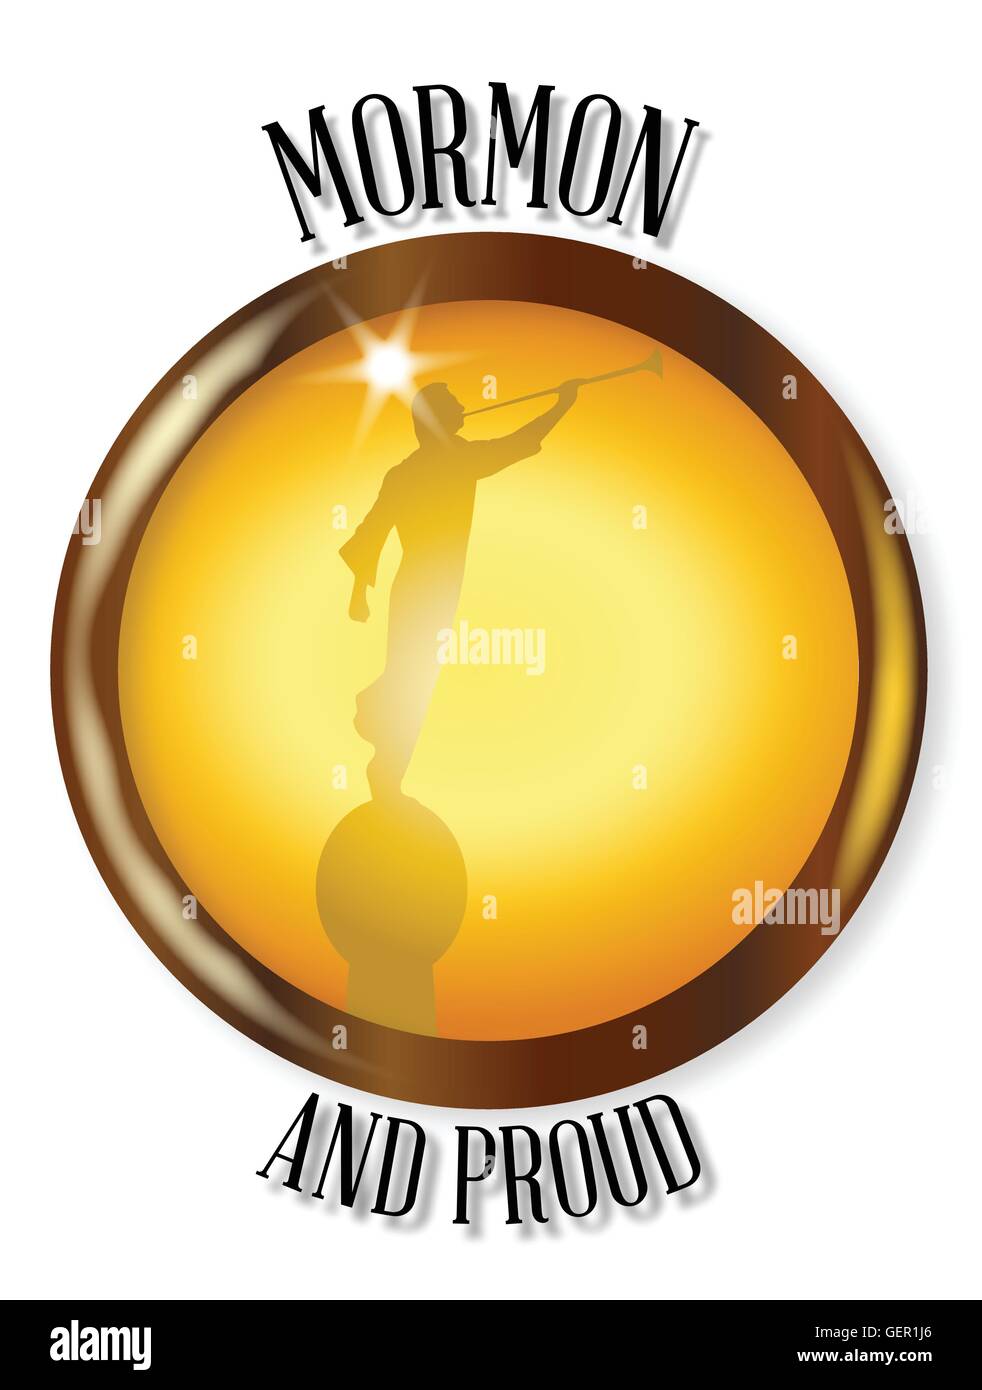 The Latter Day Saints angel Moroni blowing a horn on a Mormon and Proud button Stock Vector